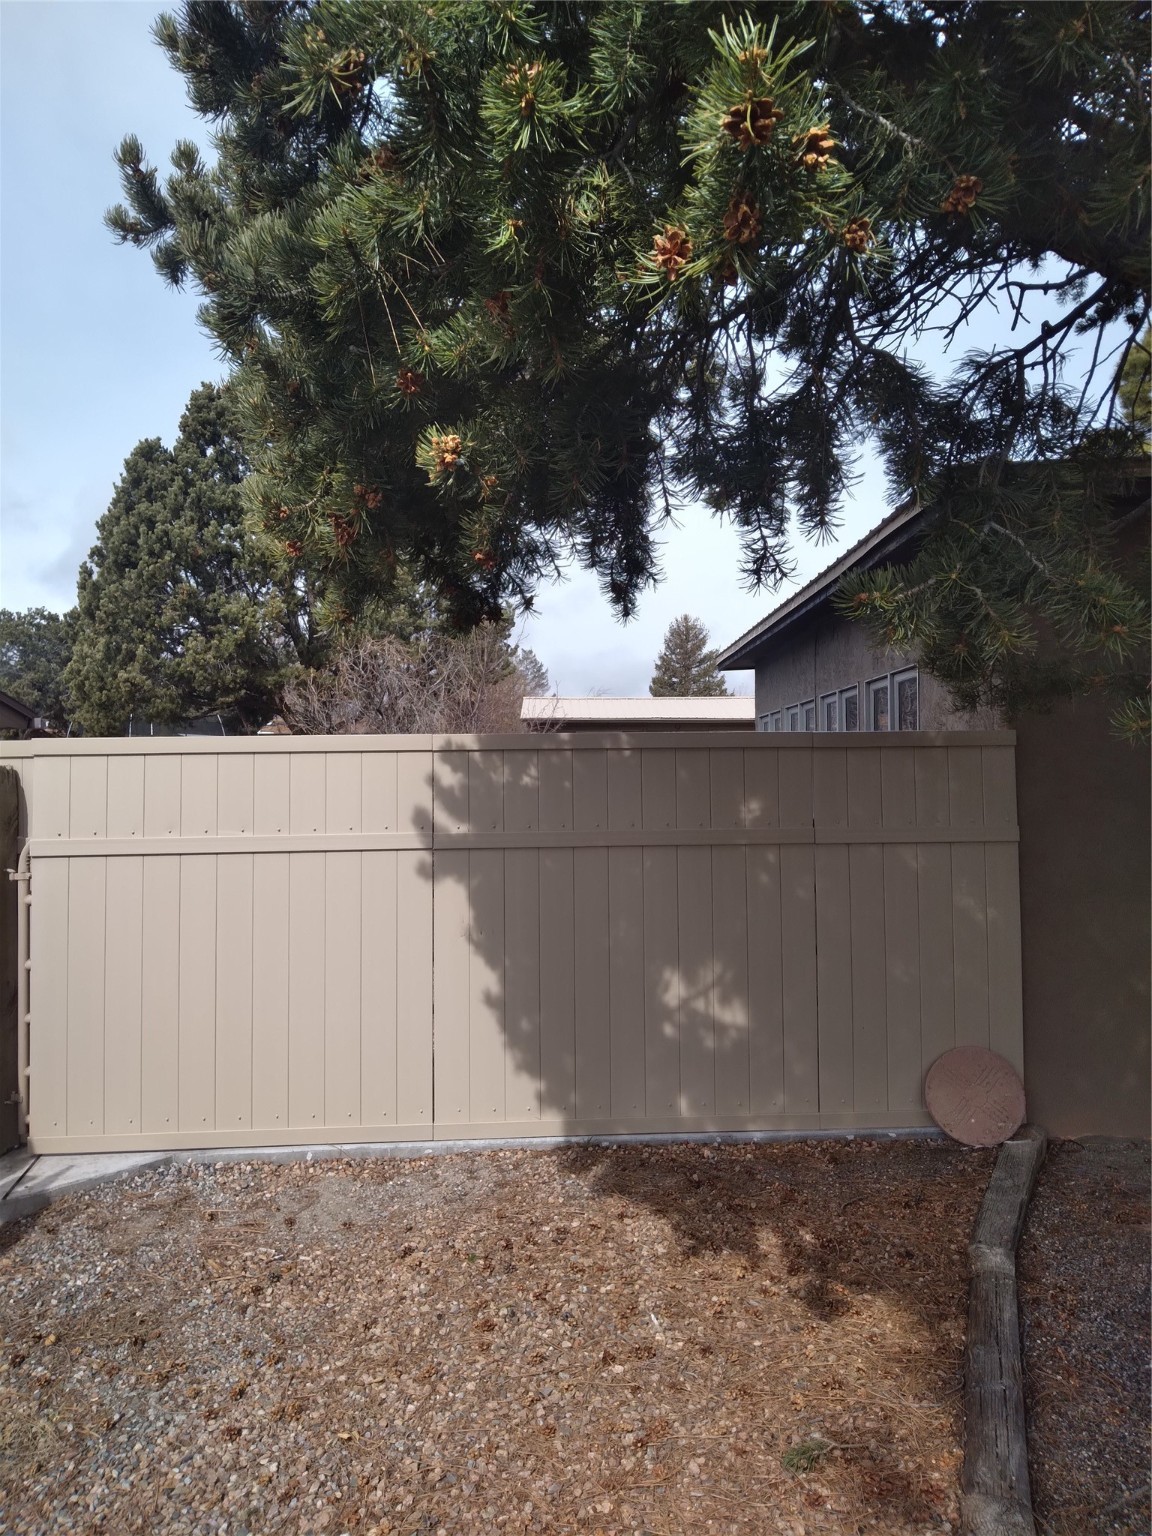 714 meadow Lane, White Rock, New Mexico 87547, 3 Bedrooms Bedrooms, ,2 BathroomsBathrooms,Residential,For Sale,714 meadow Lane,202336312